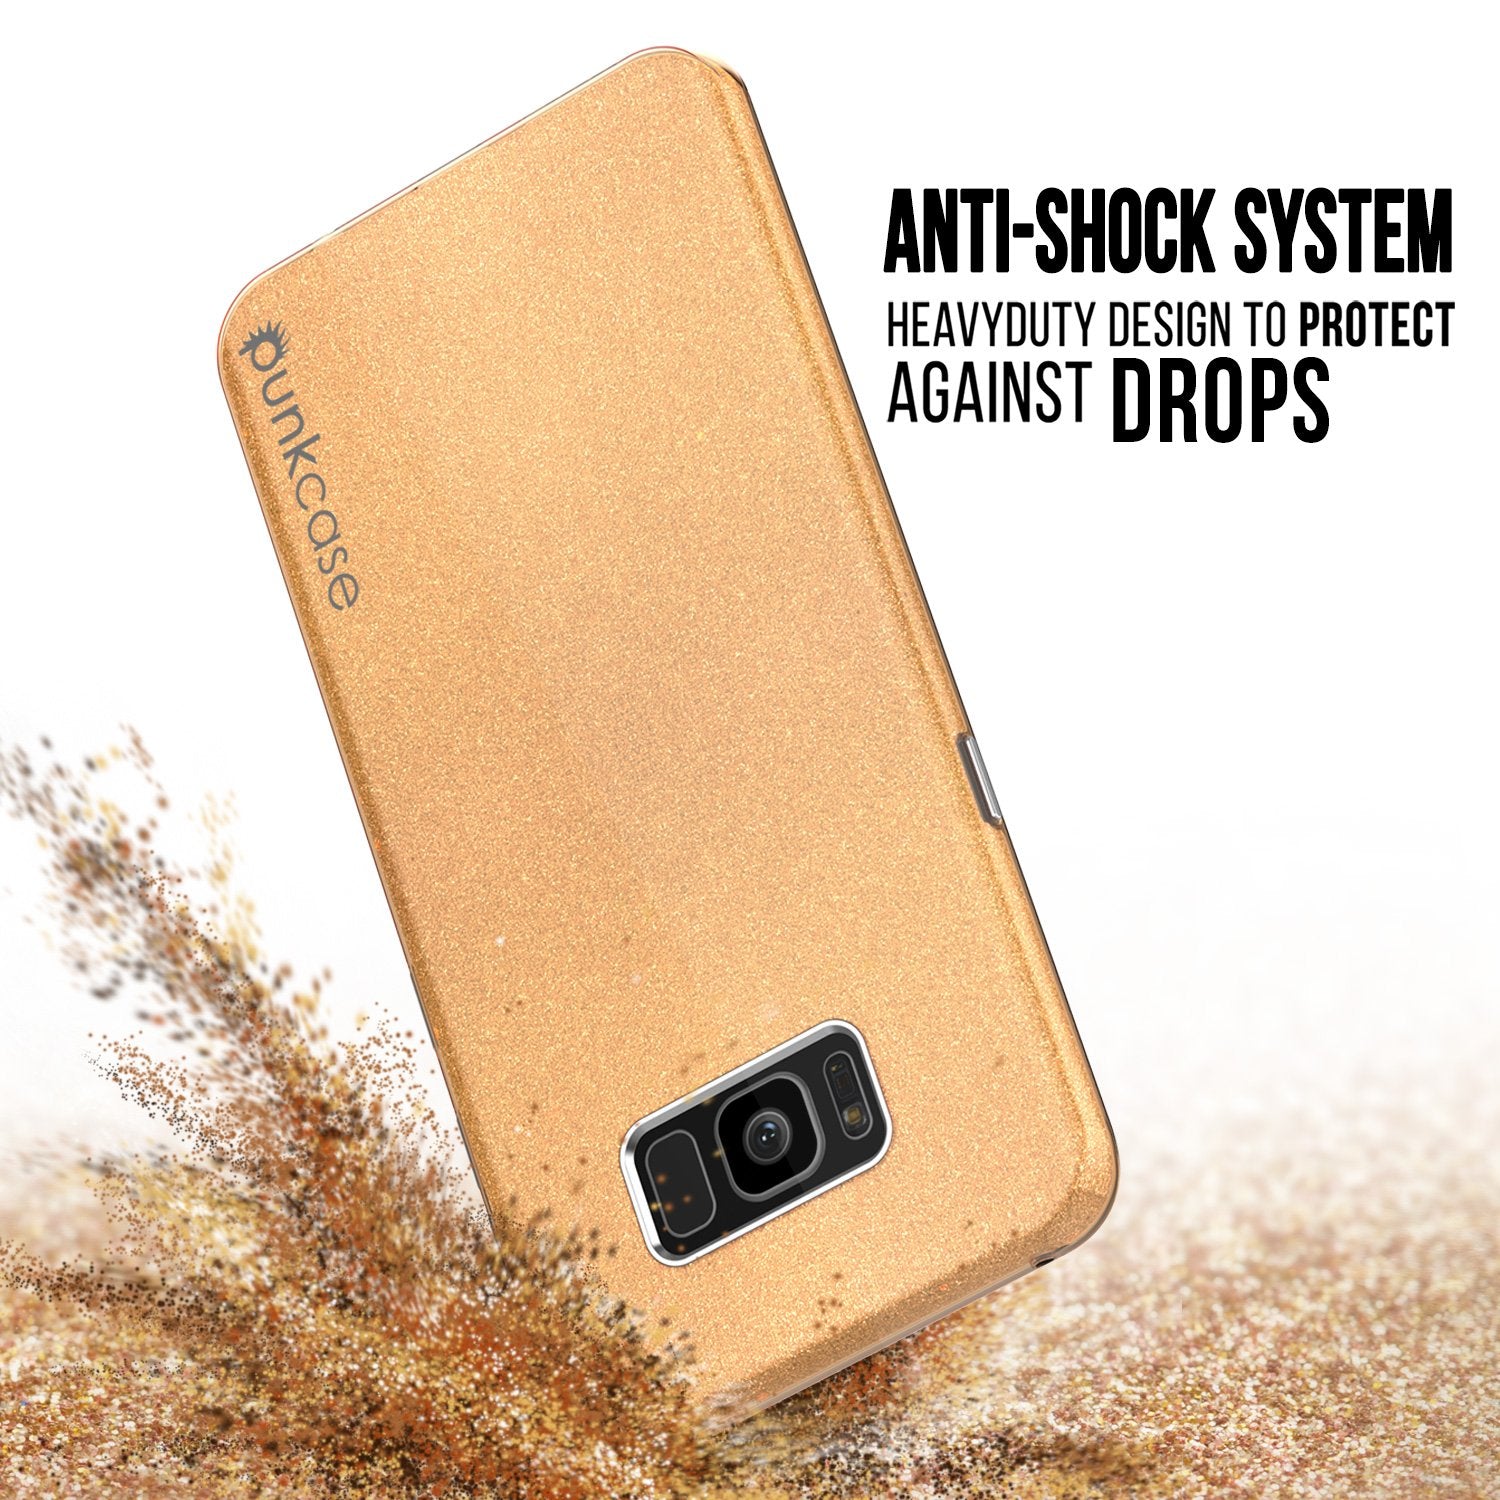 Galaxy S8 Case, Punkcase Galactic 2.0 Series Ultra Slim Protective Armor Cover [Gold]